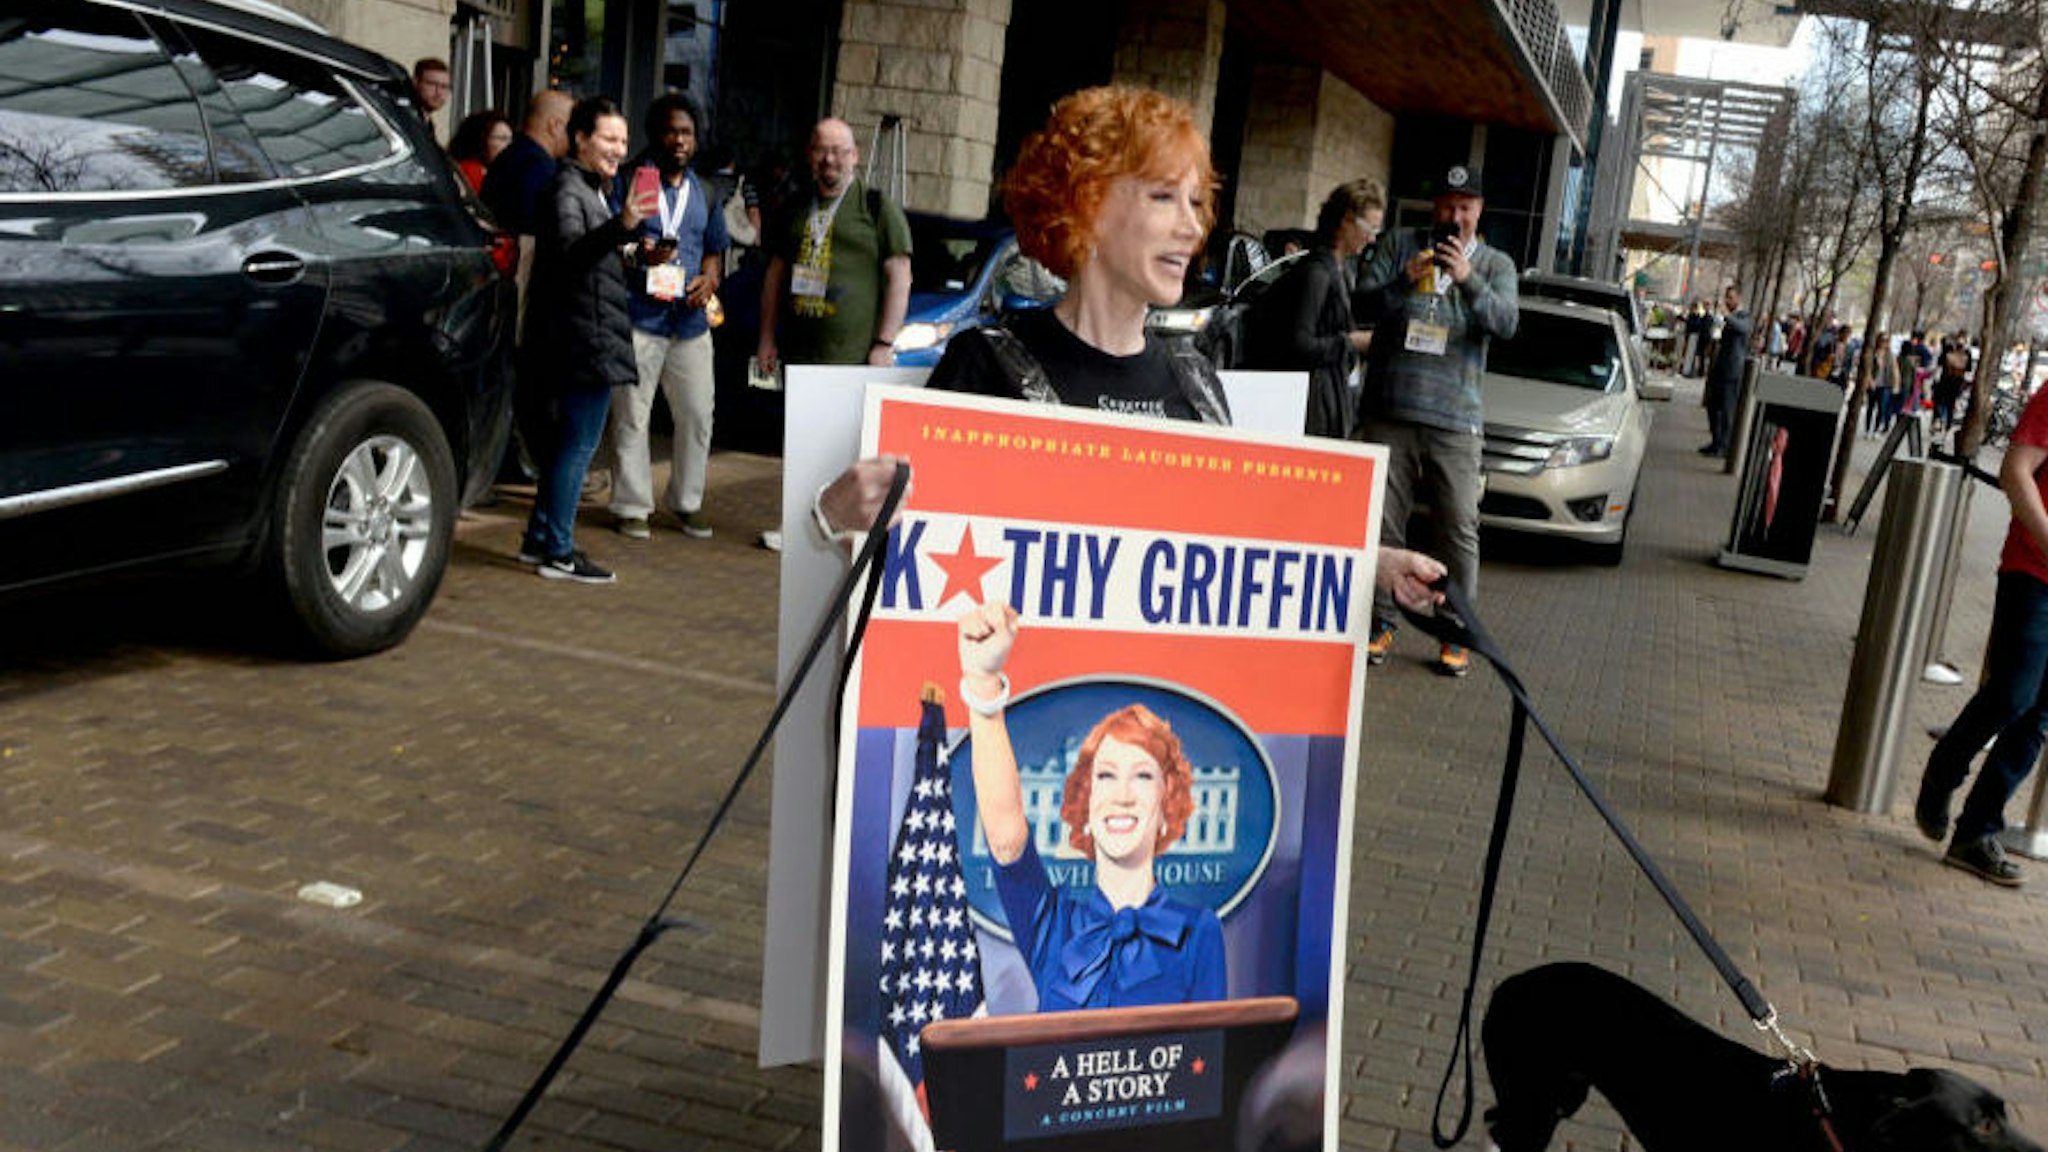 AUSTIN, TX - MARCH 12: Kathy Griffin attends the 2019 SXSW Conference And Festival on March 8, 2019 in Austin, Texas.